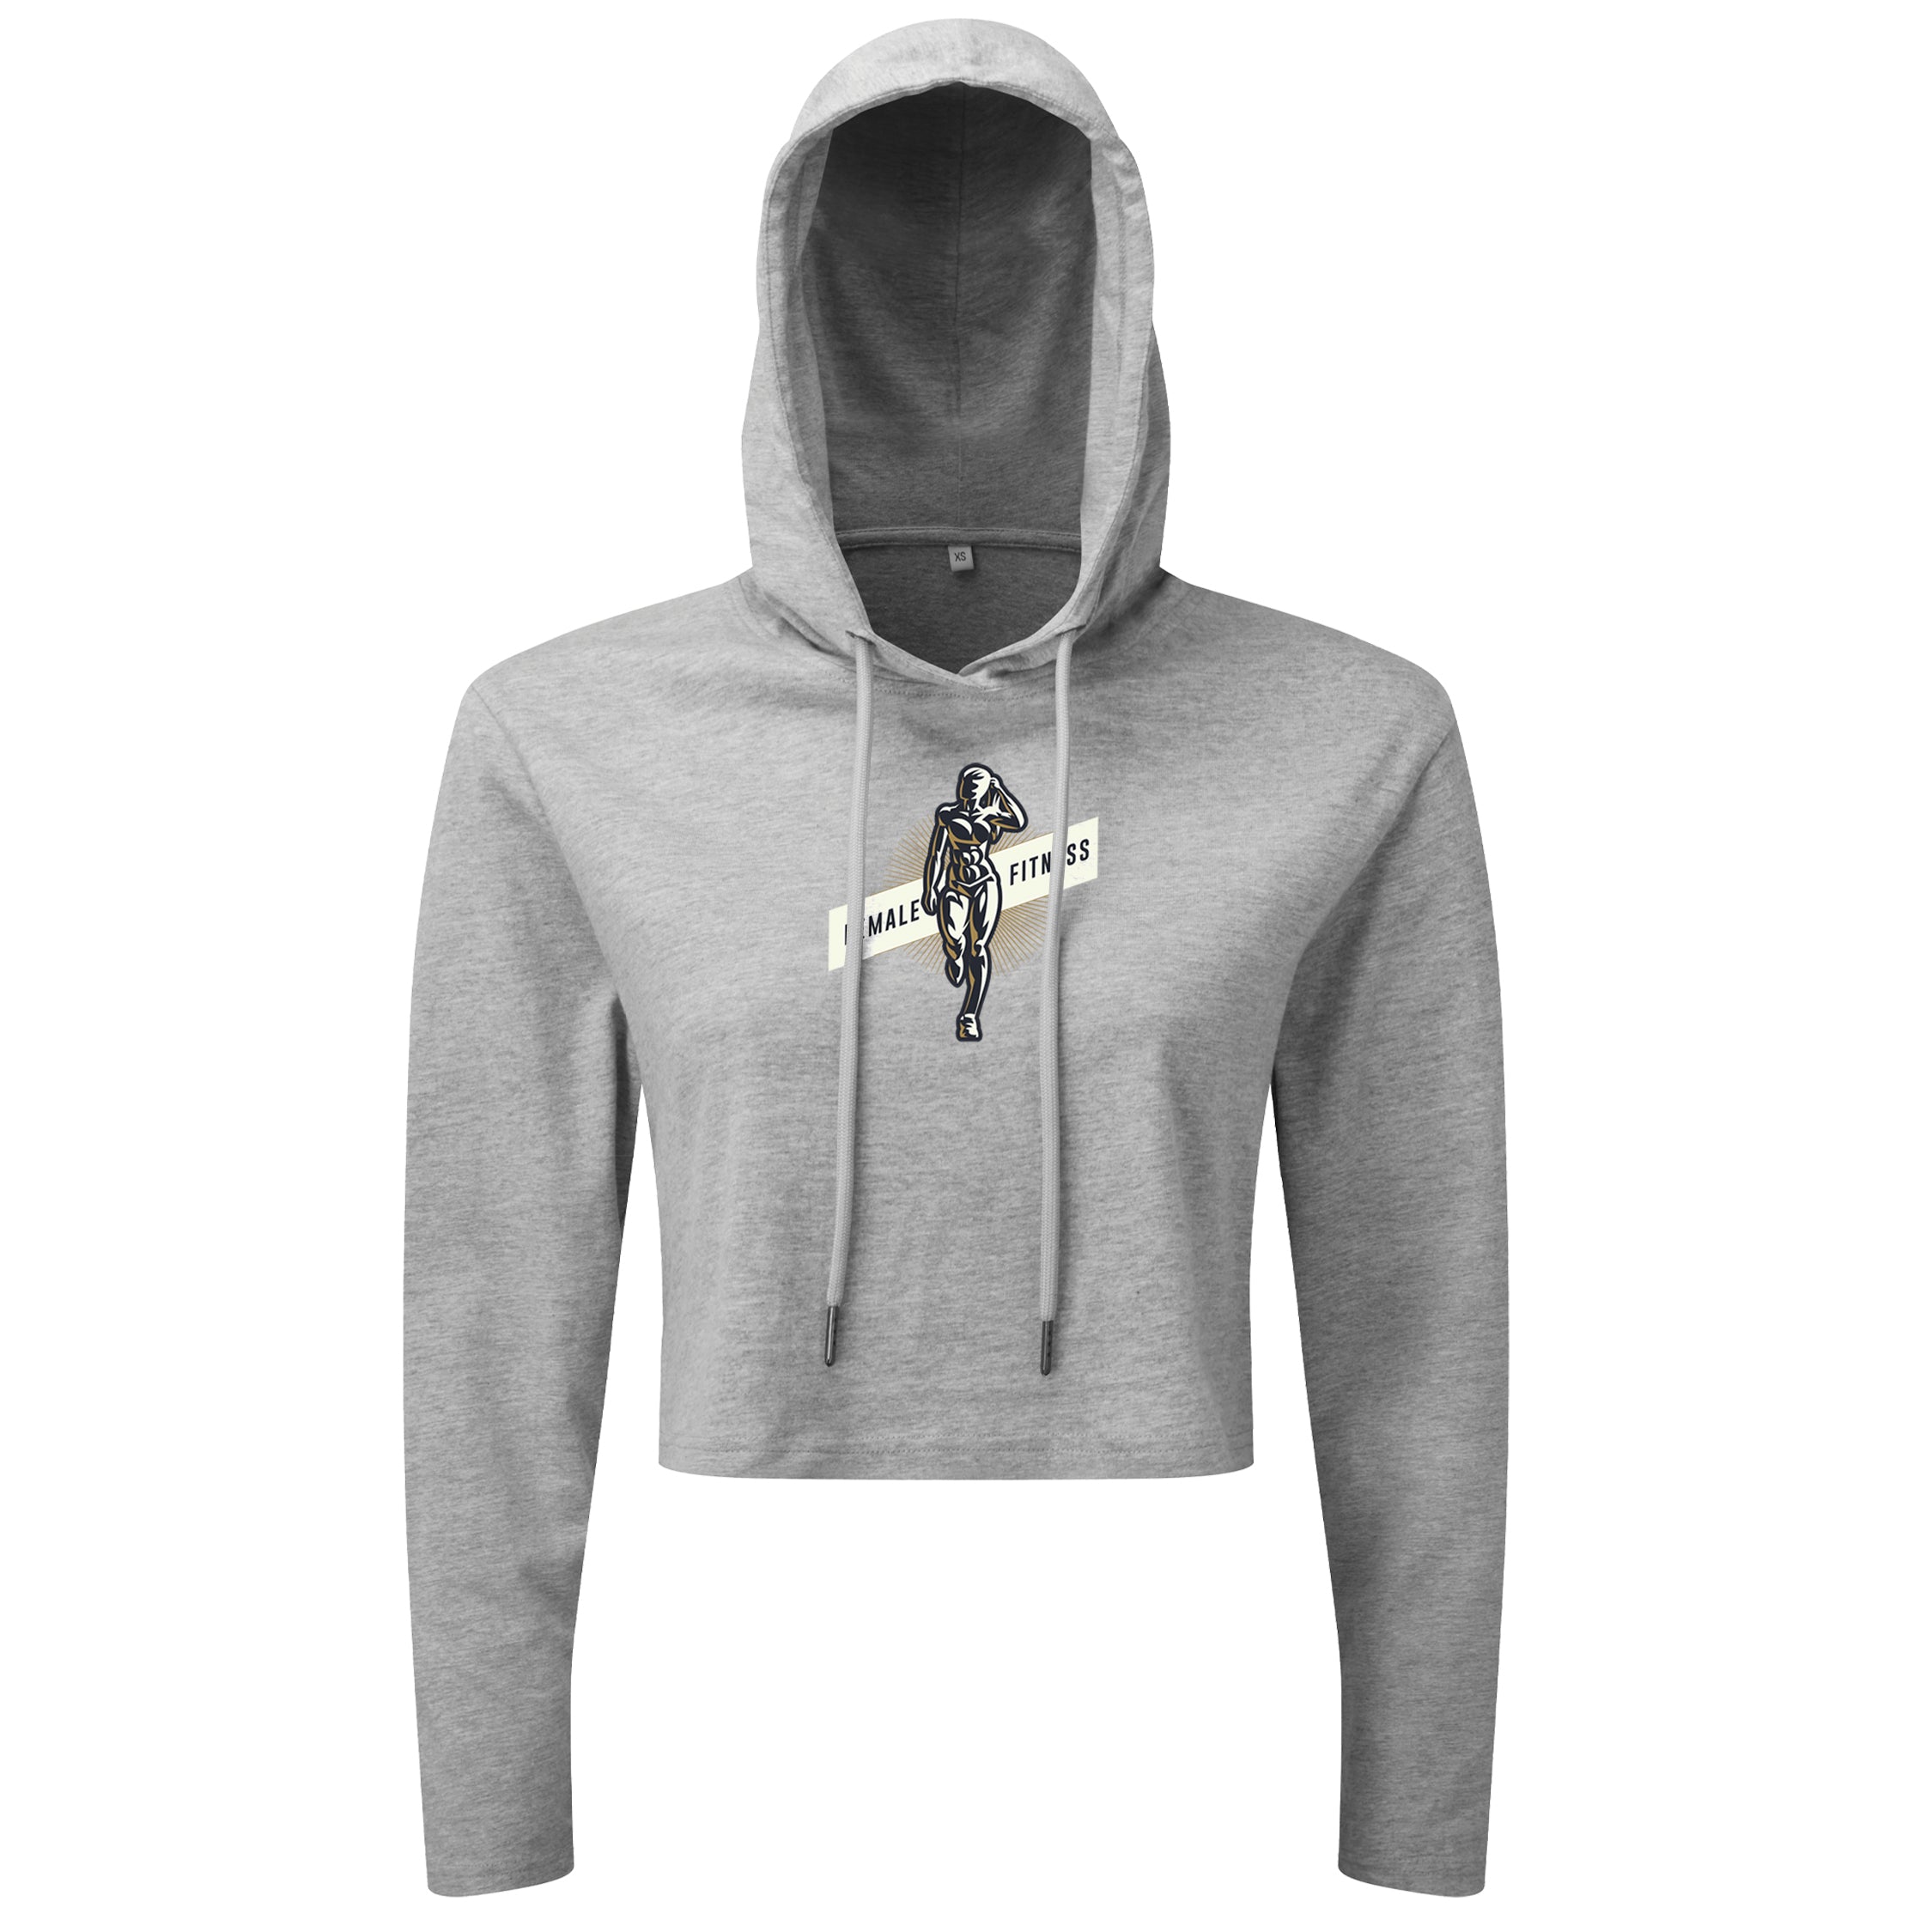 Strong Woman Female Fitness - Cropped Hoodie